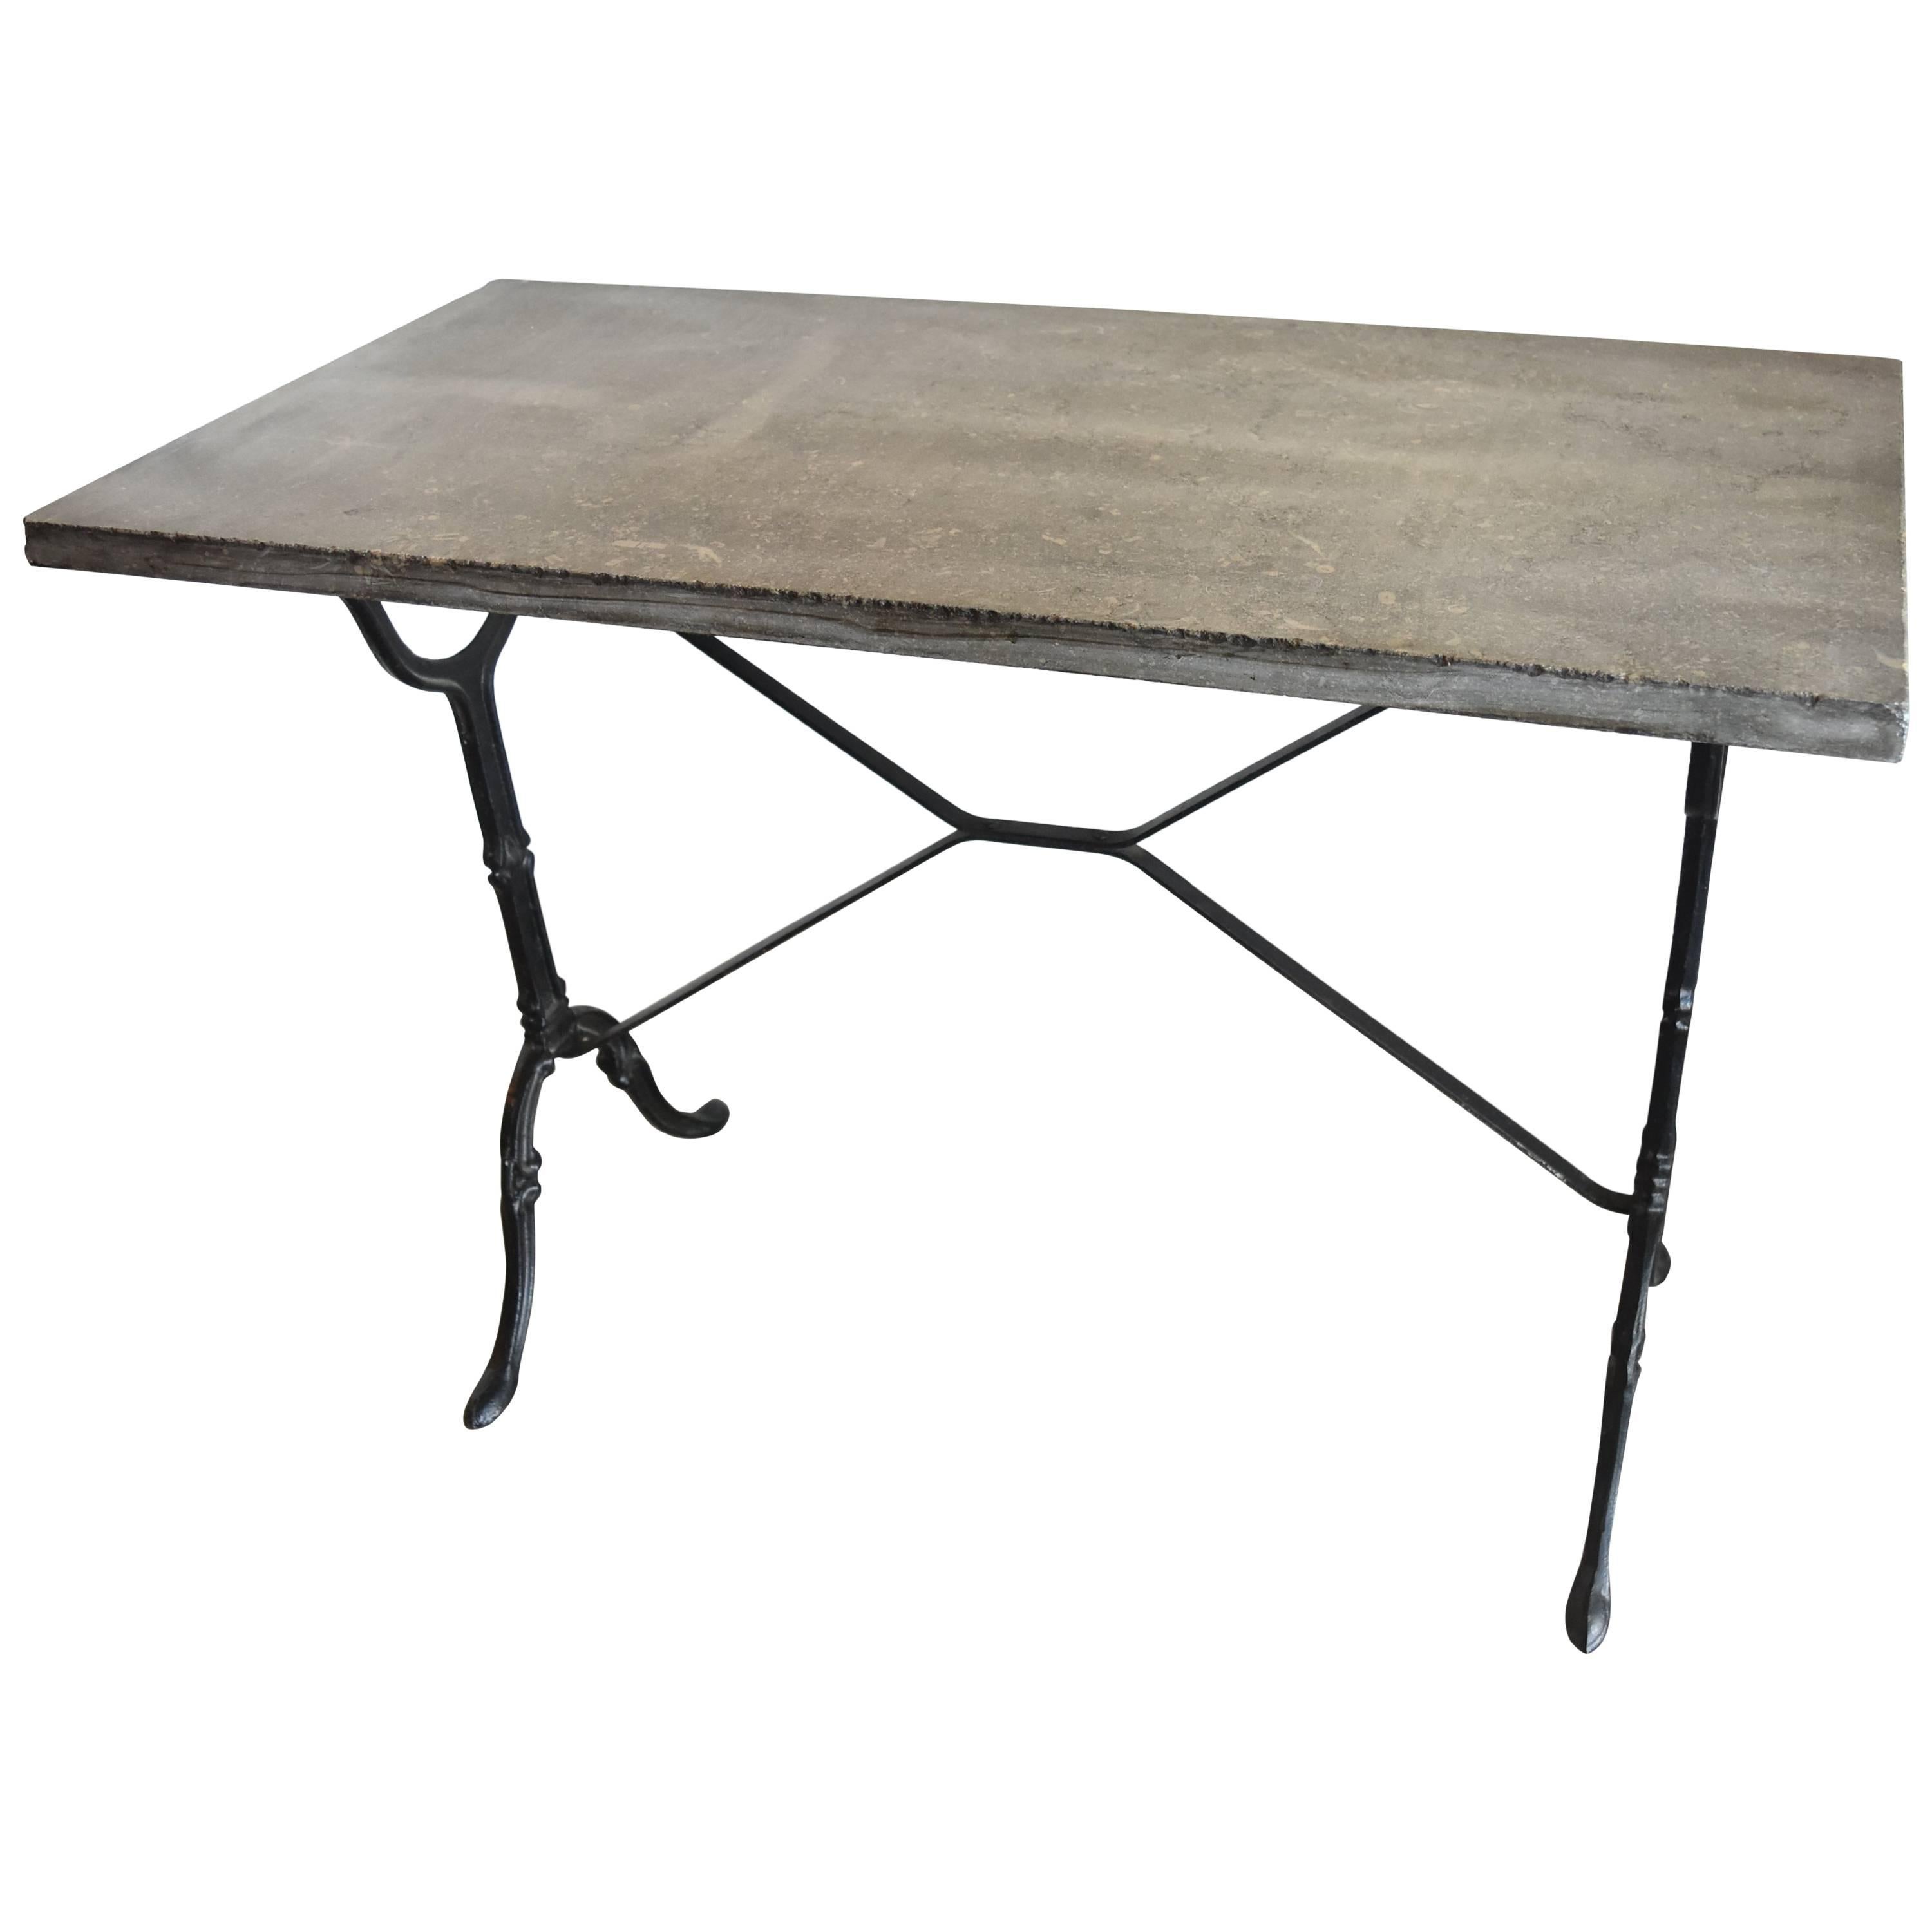 Vintage Blue Stone Marble Top Table with Metal Painted Black Base from Belgium